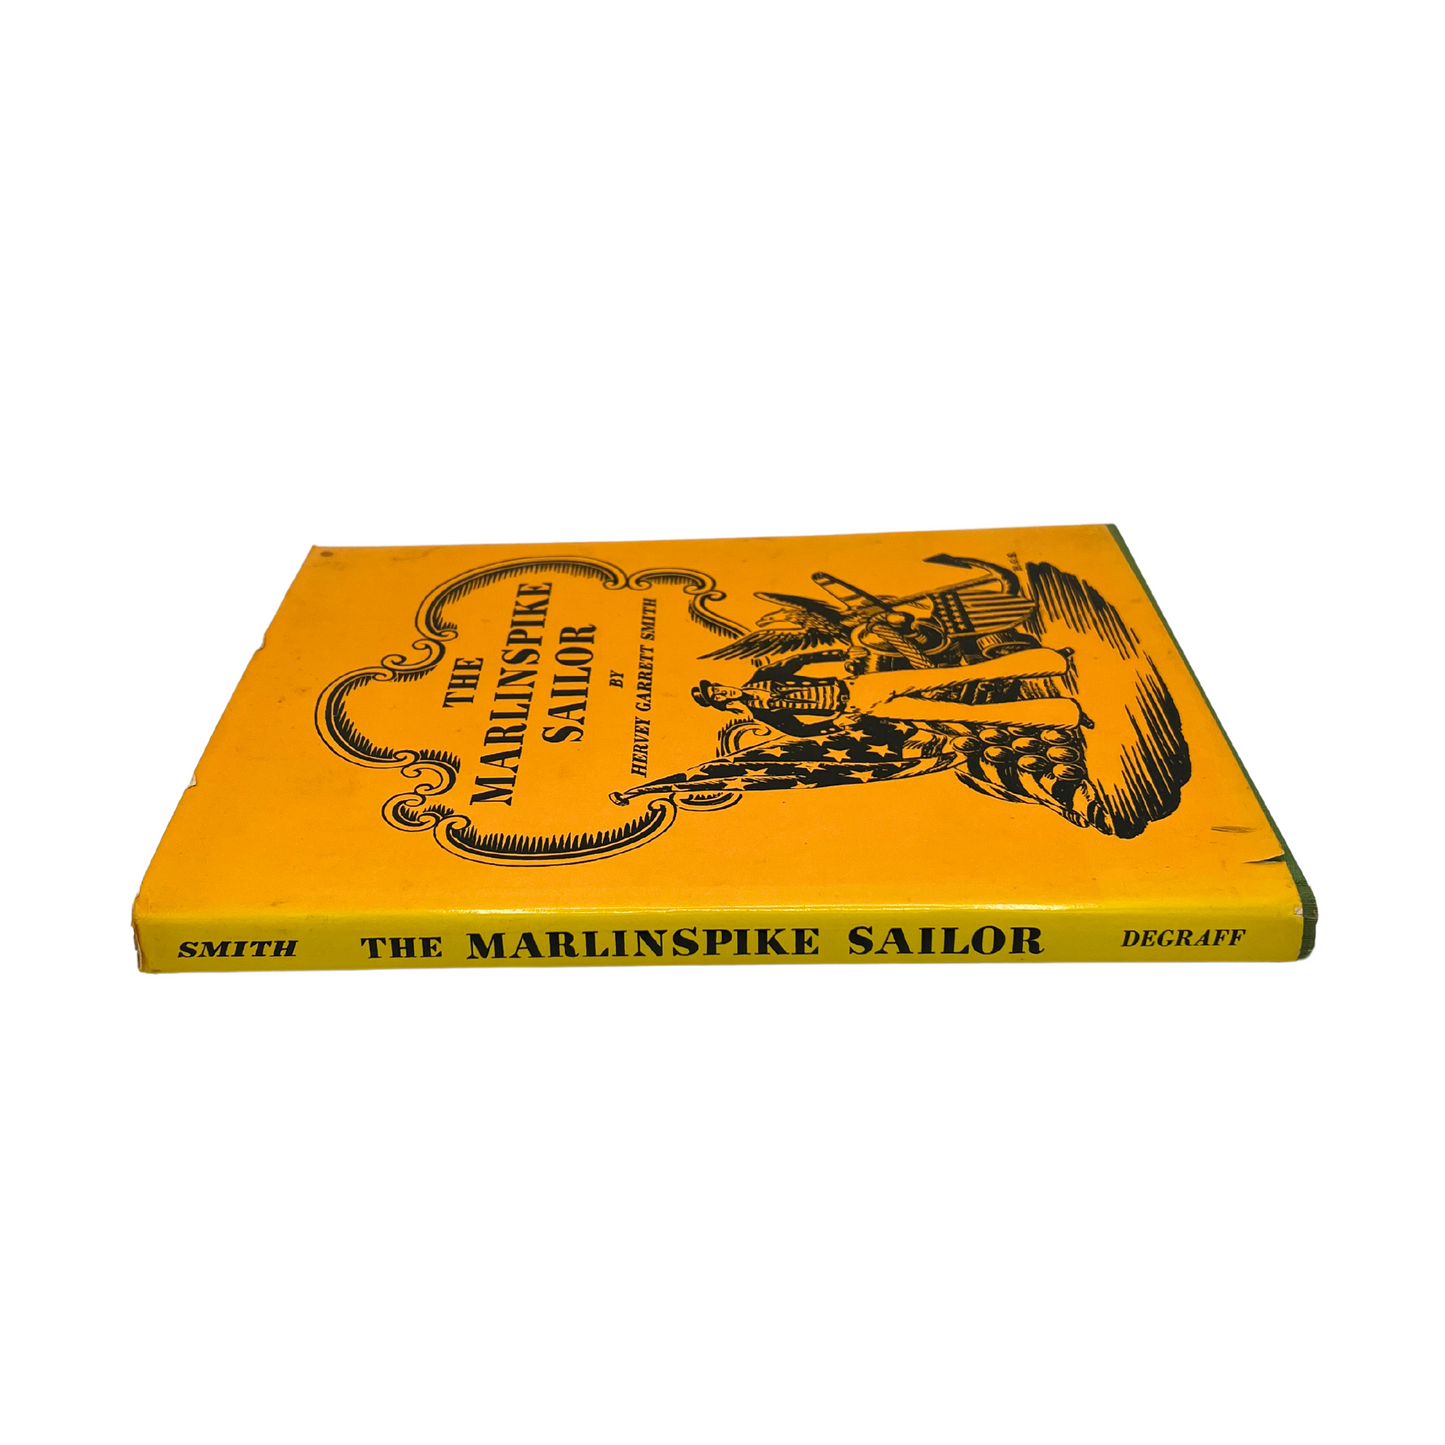 1971 hardcover book: The Marlinspike Sailor